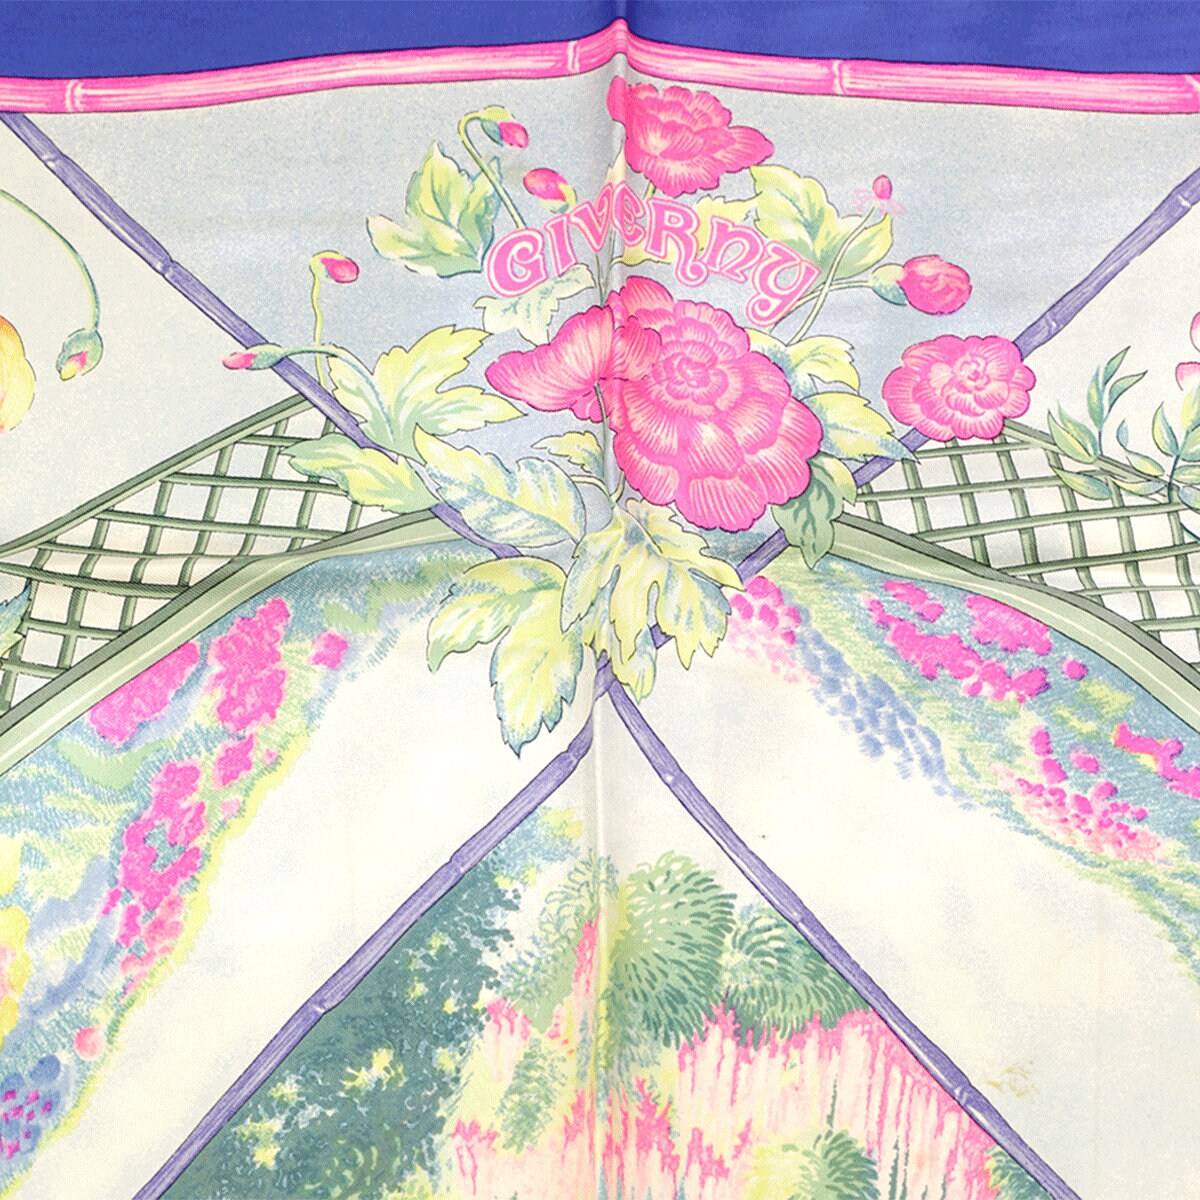 Hermes Scarf "Giverny" by Laurence Bourthoumieux 90cm Silk | Carre Foulard